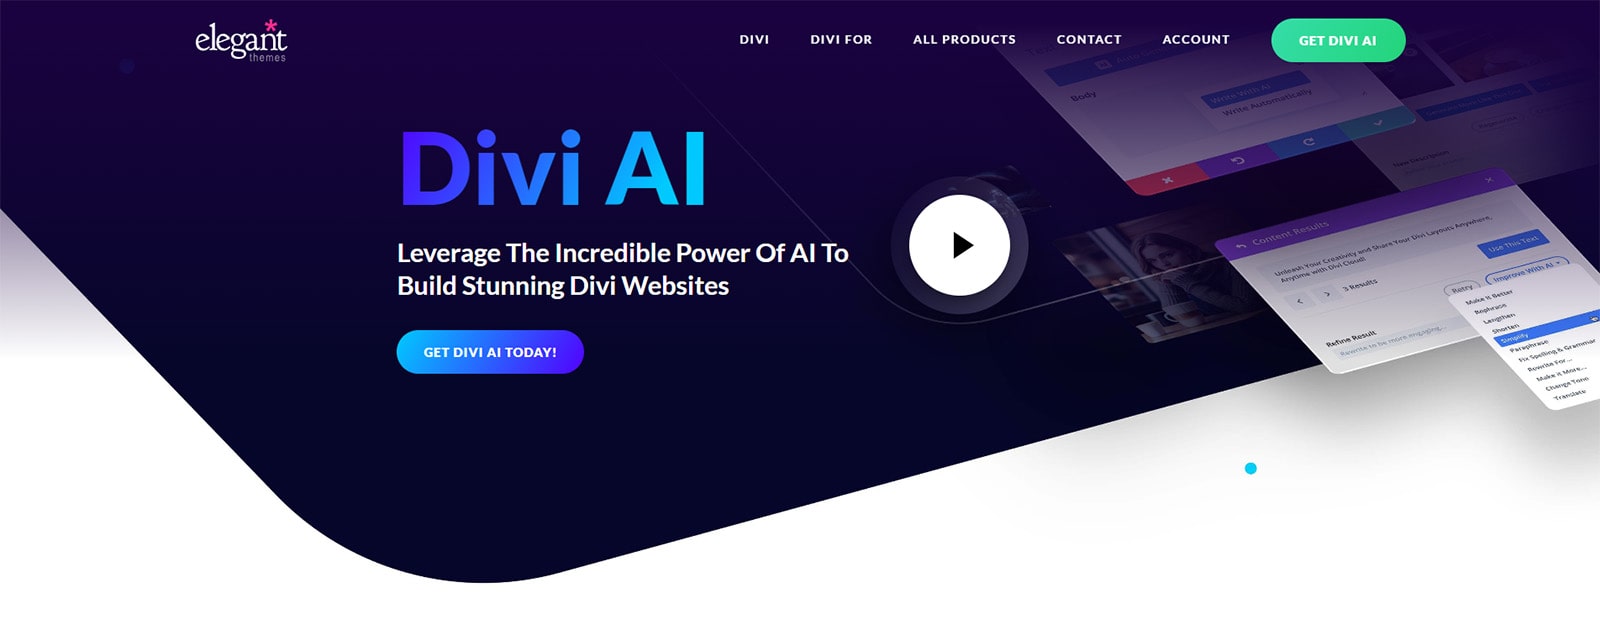 Graphic of Divi, an AI-powered website builder with image & text content generation.